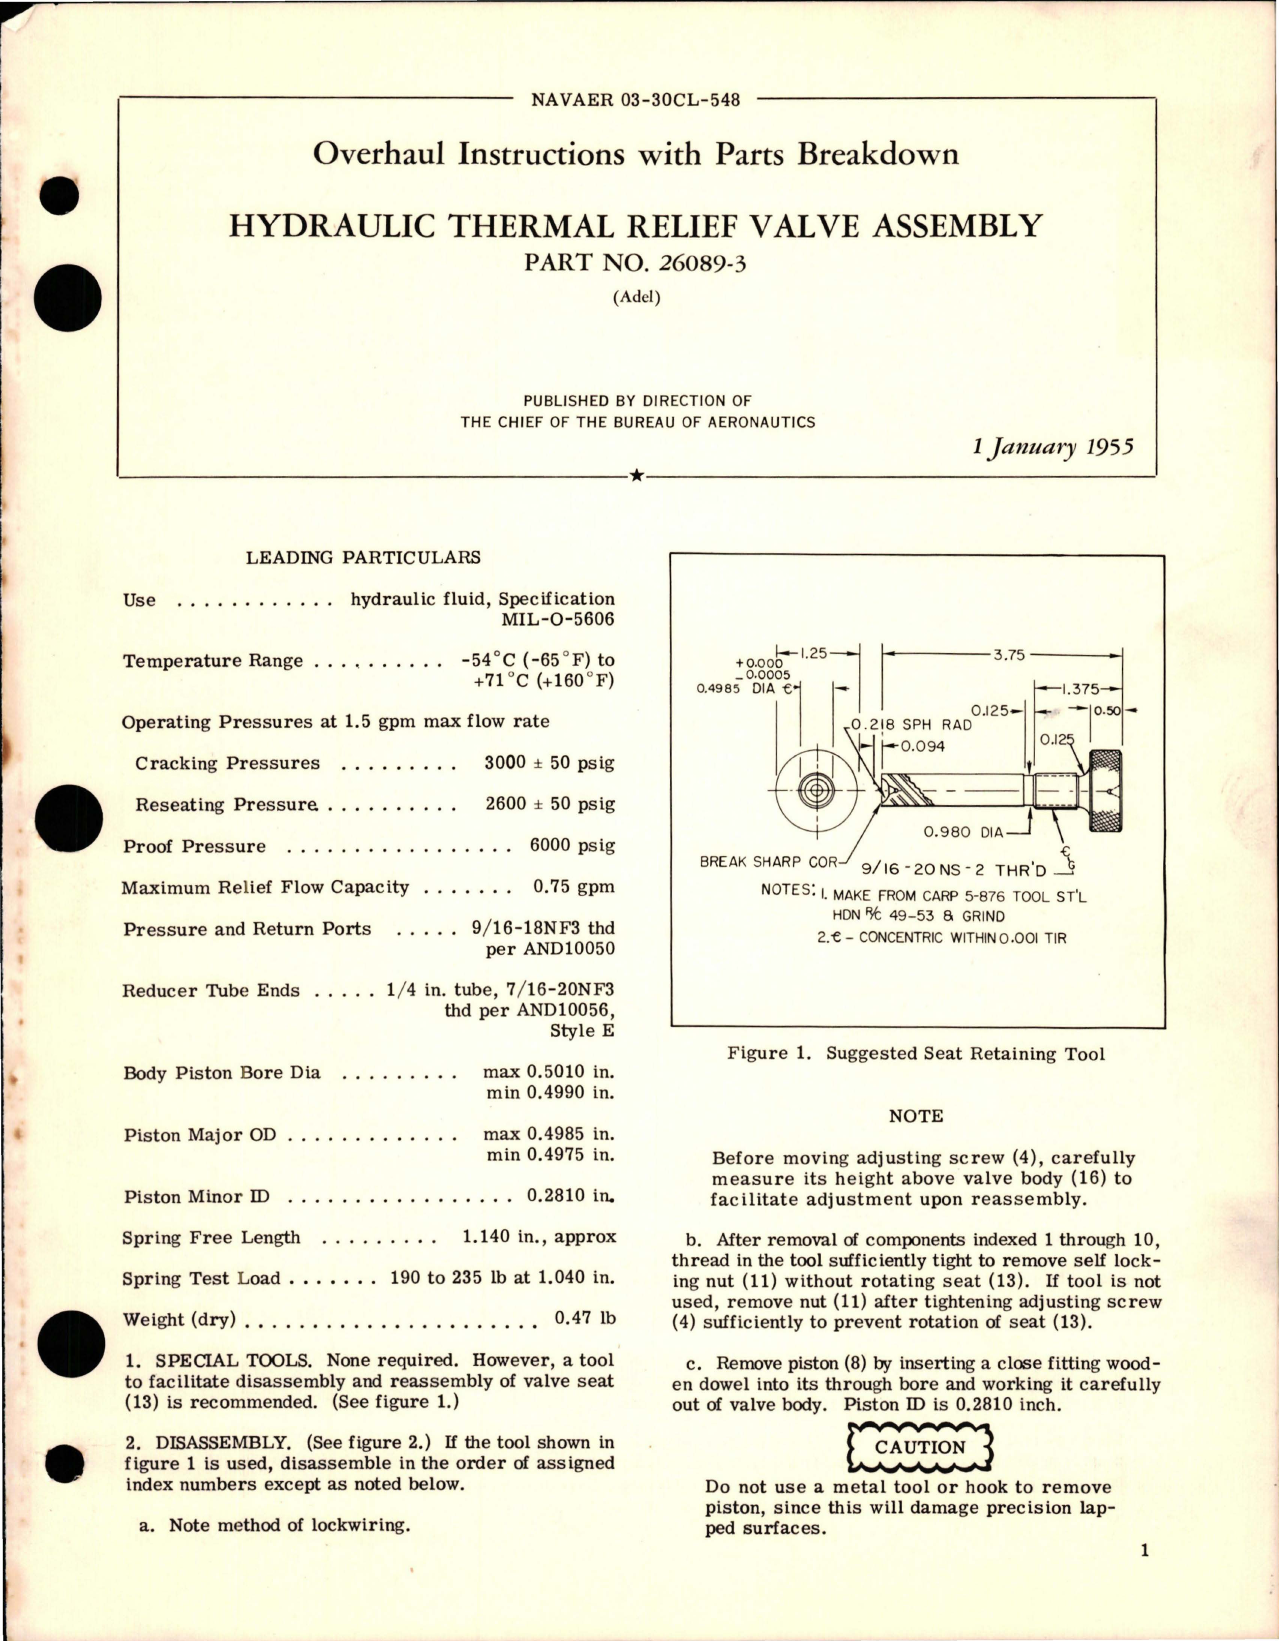 Sample page 1 from AirCorps Library document: Overhaul Instructions with Parts for Hydraulic Thermal Relief Valve Assembly - Part 26089-3 